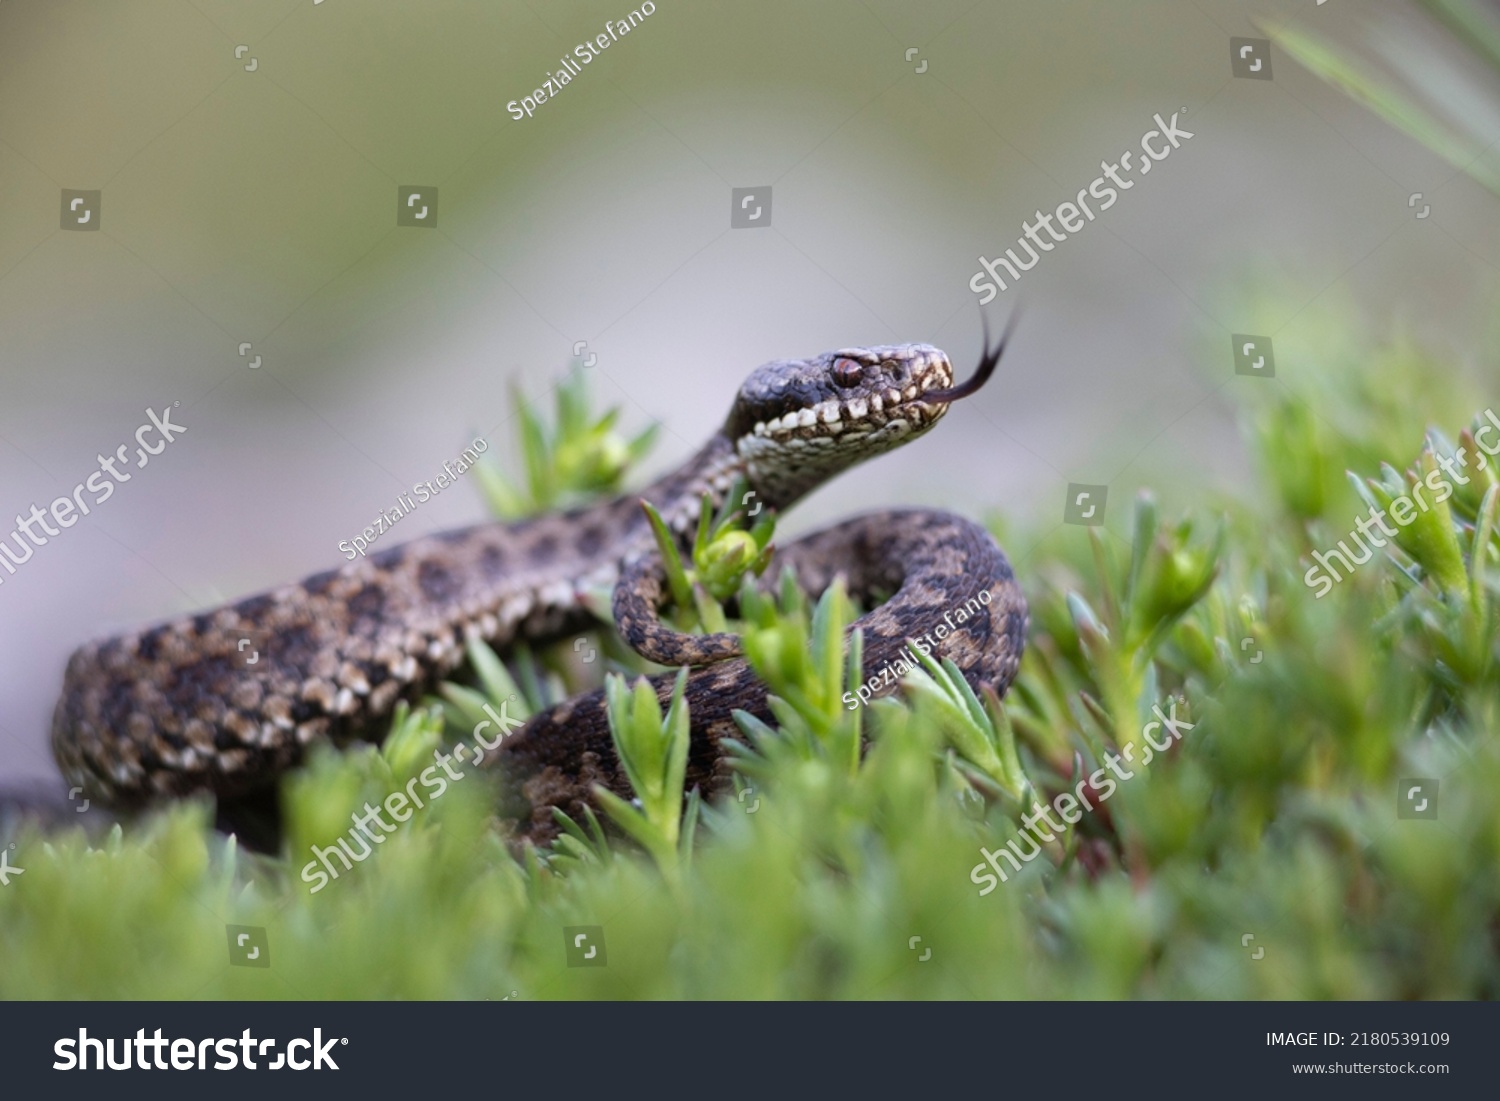 Vipera berus, the common European adder or common European viper, is a venomous snake that is extremely widespread and can be found throughout most of central and eastern Europe #2180539109